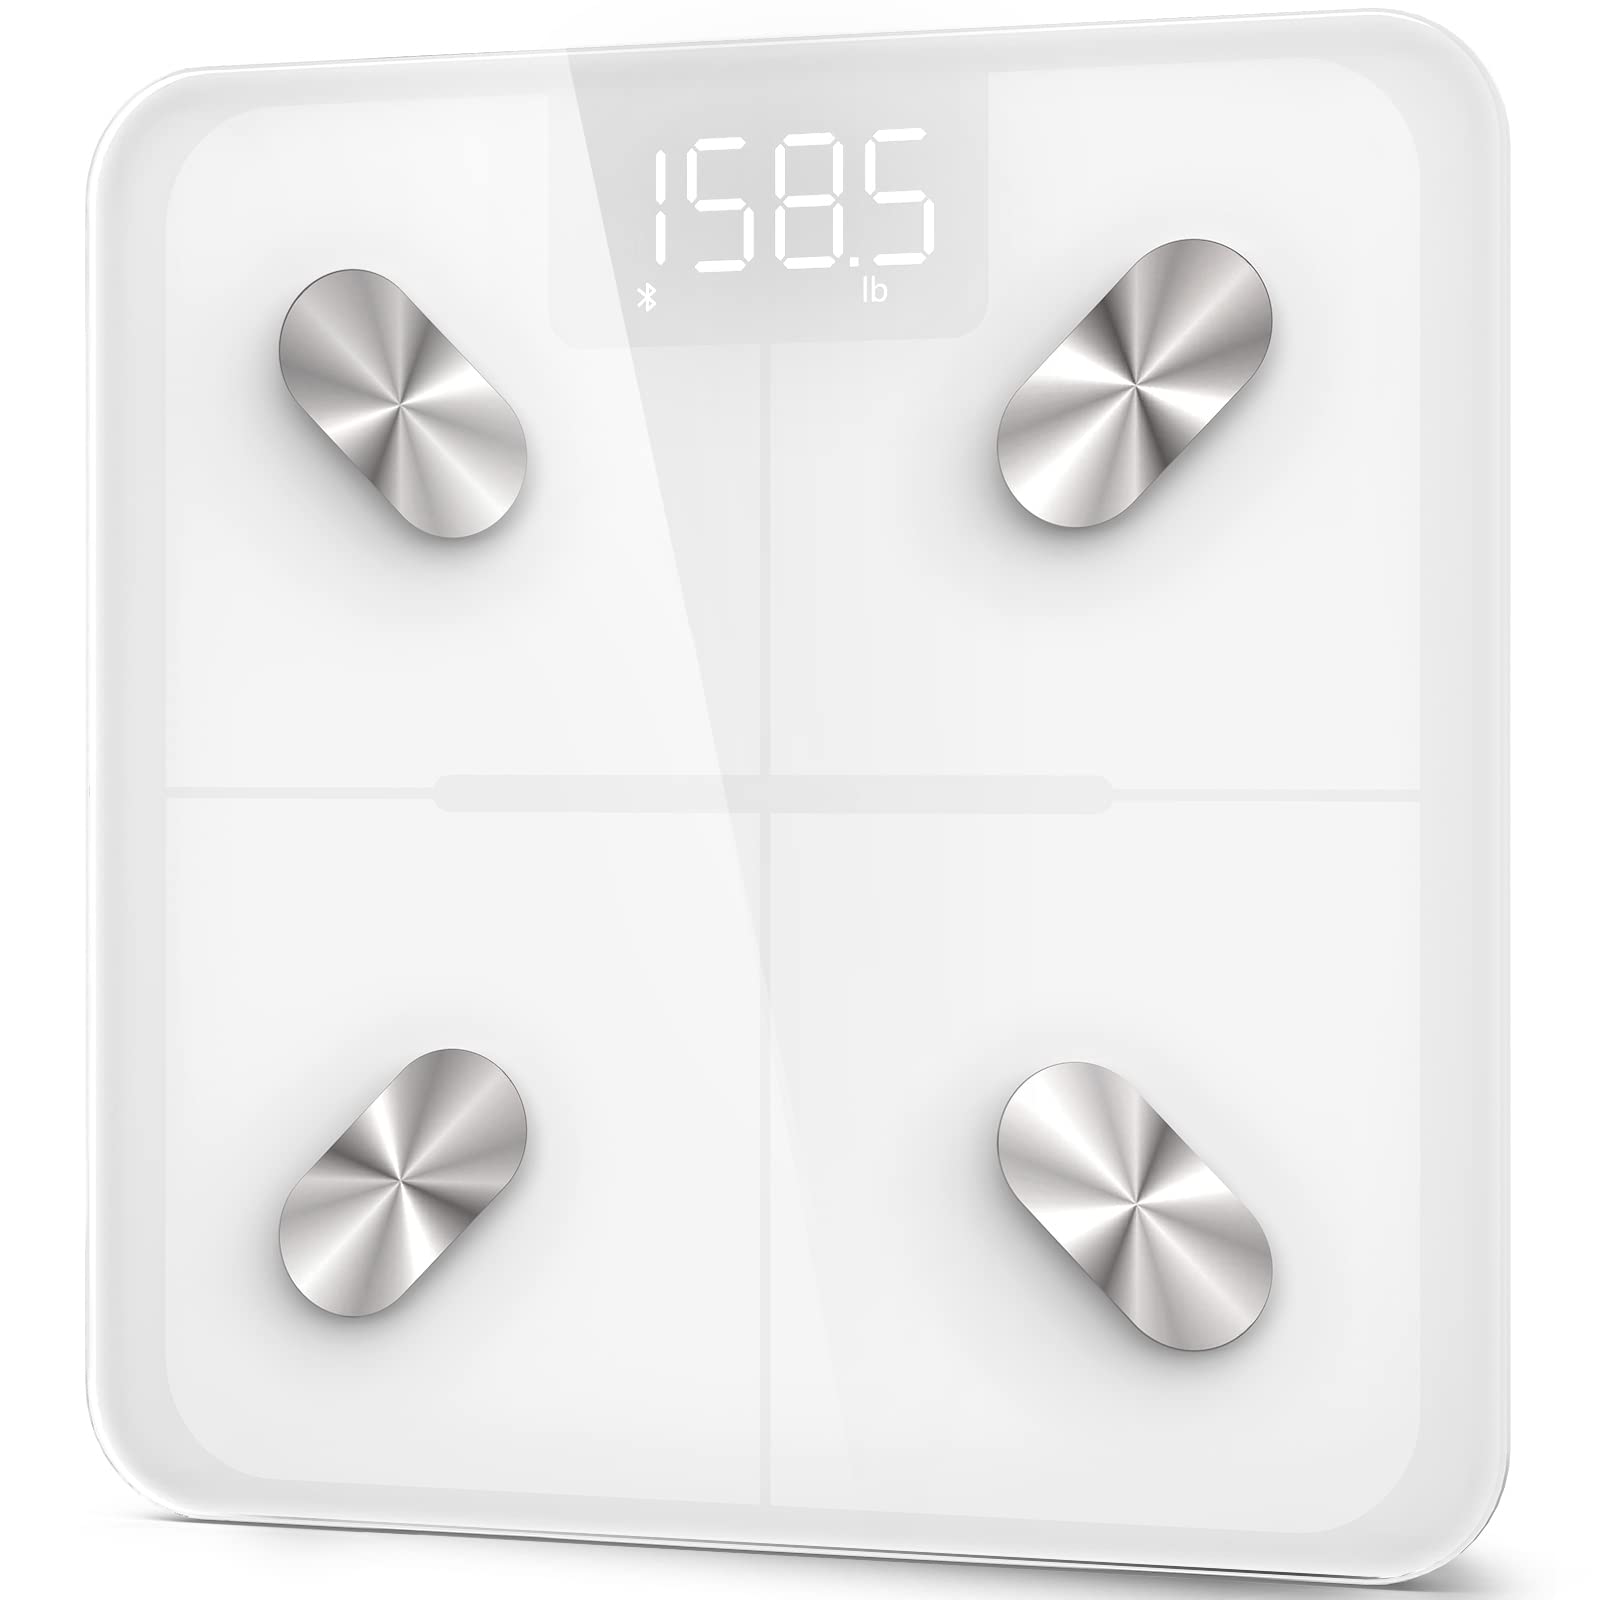 Etekcity Scales for Body Weight, Bathroom Digital Weight Scale for Body  Fat, Smart Bluetooth Scale for BMI, and Weight Loss, Sync 13 Data with  Other